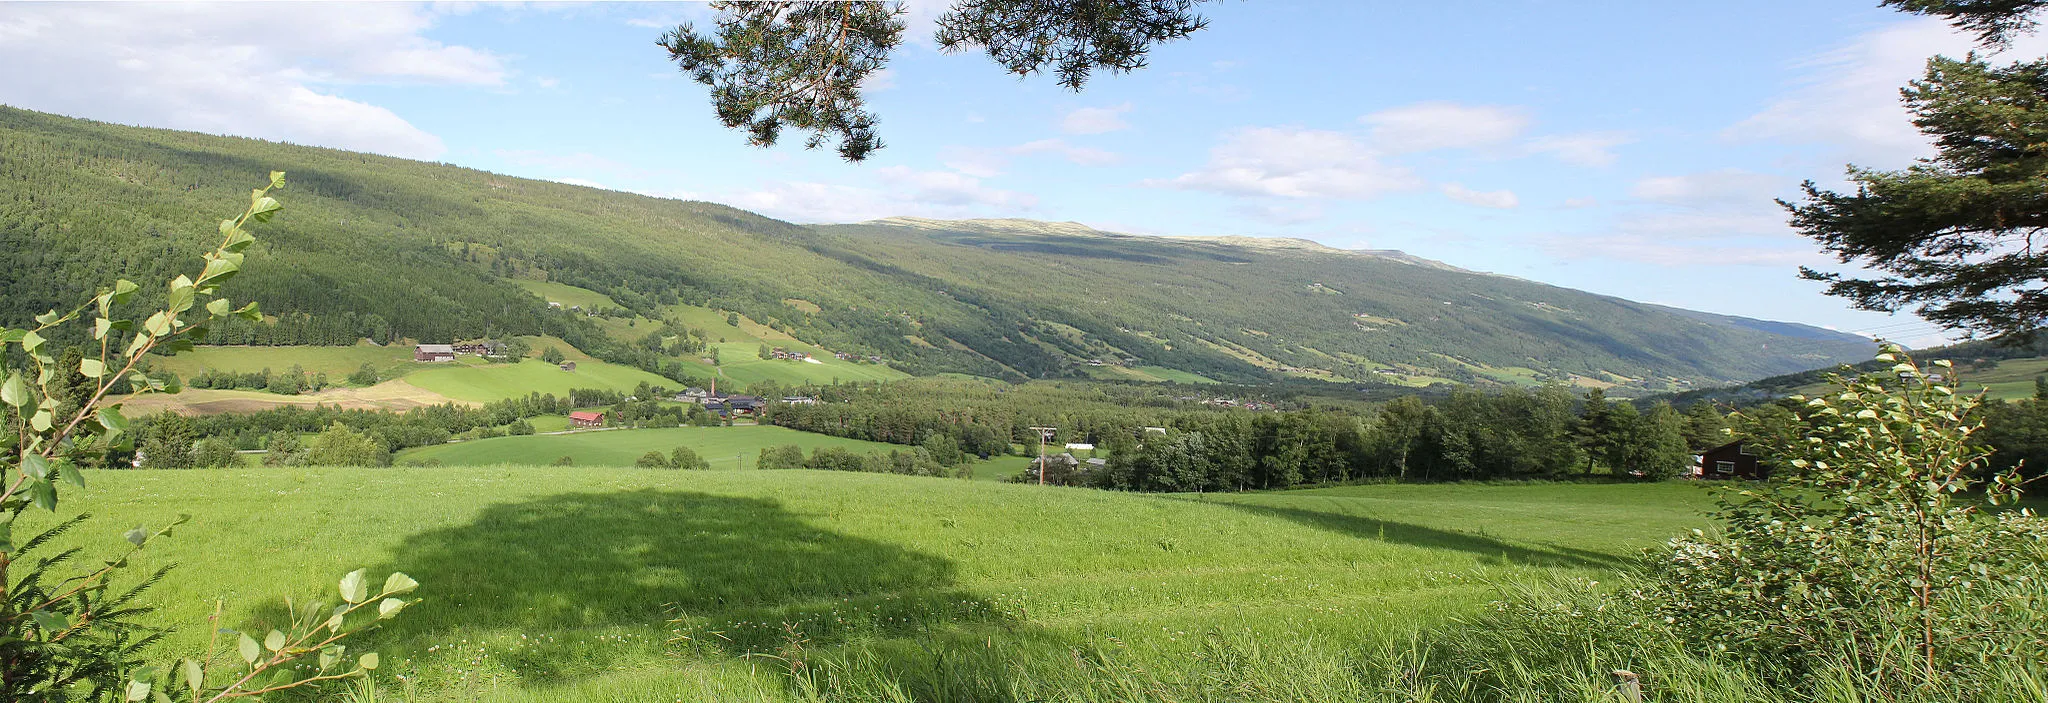 Photo showing: Heidal, a valley in Sel municipality, Norway